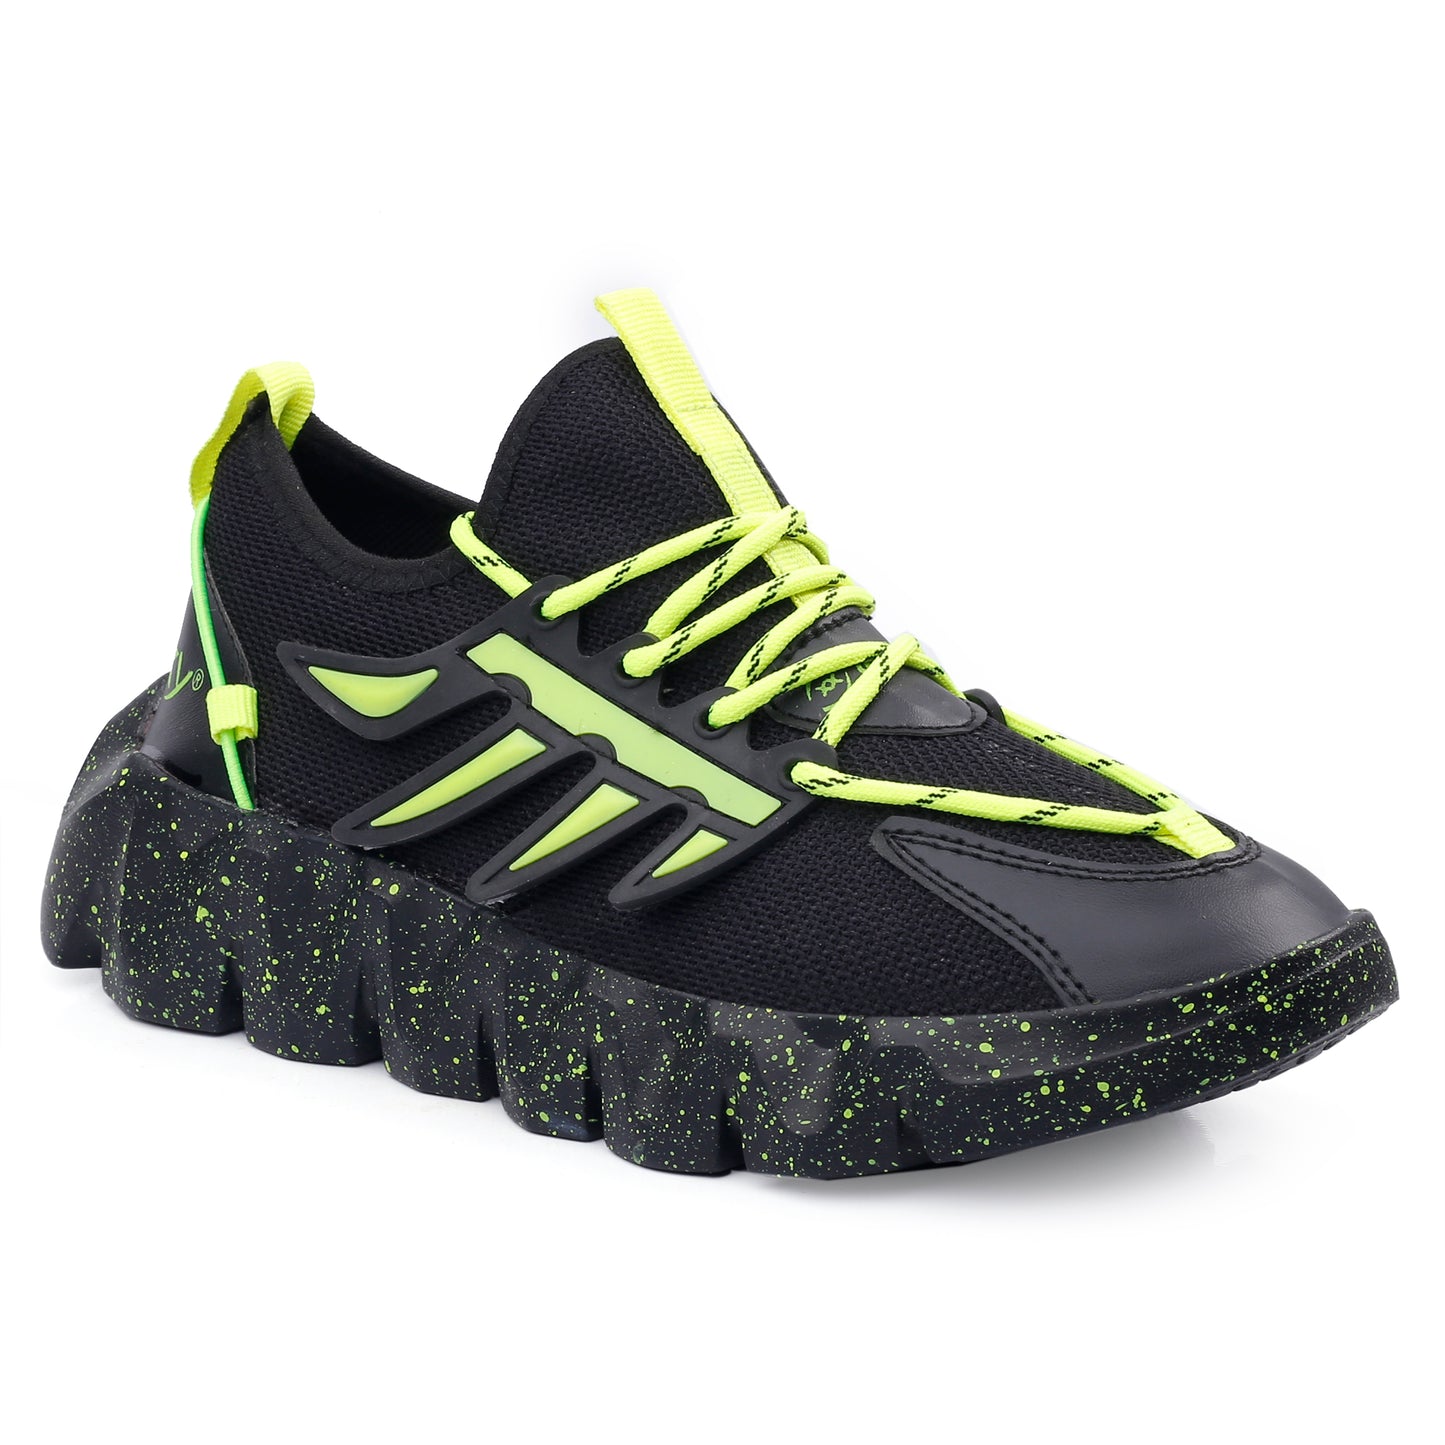 Men/s Latest Casual Mesh Material Outdoor Running Sports Shoes